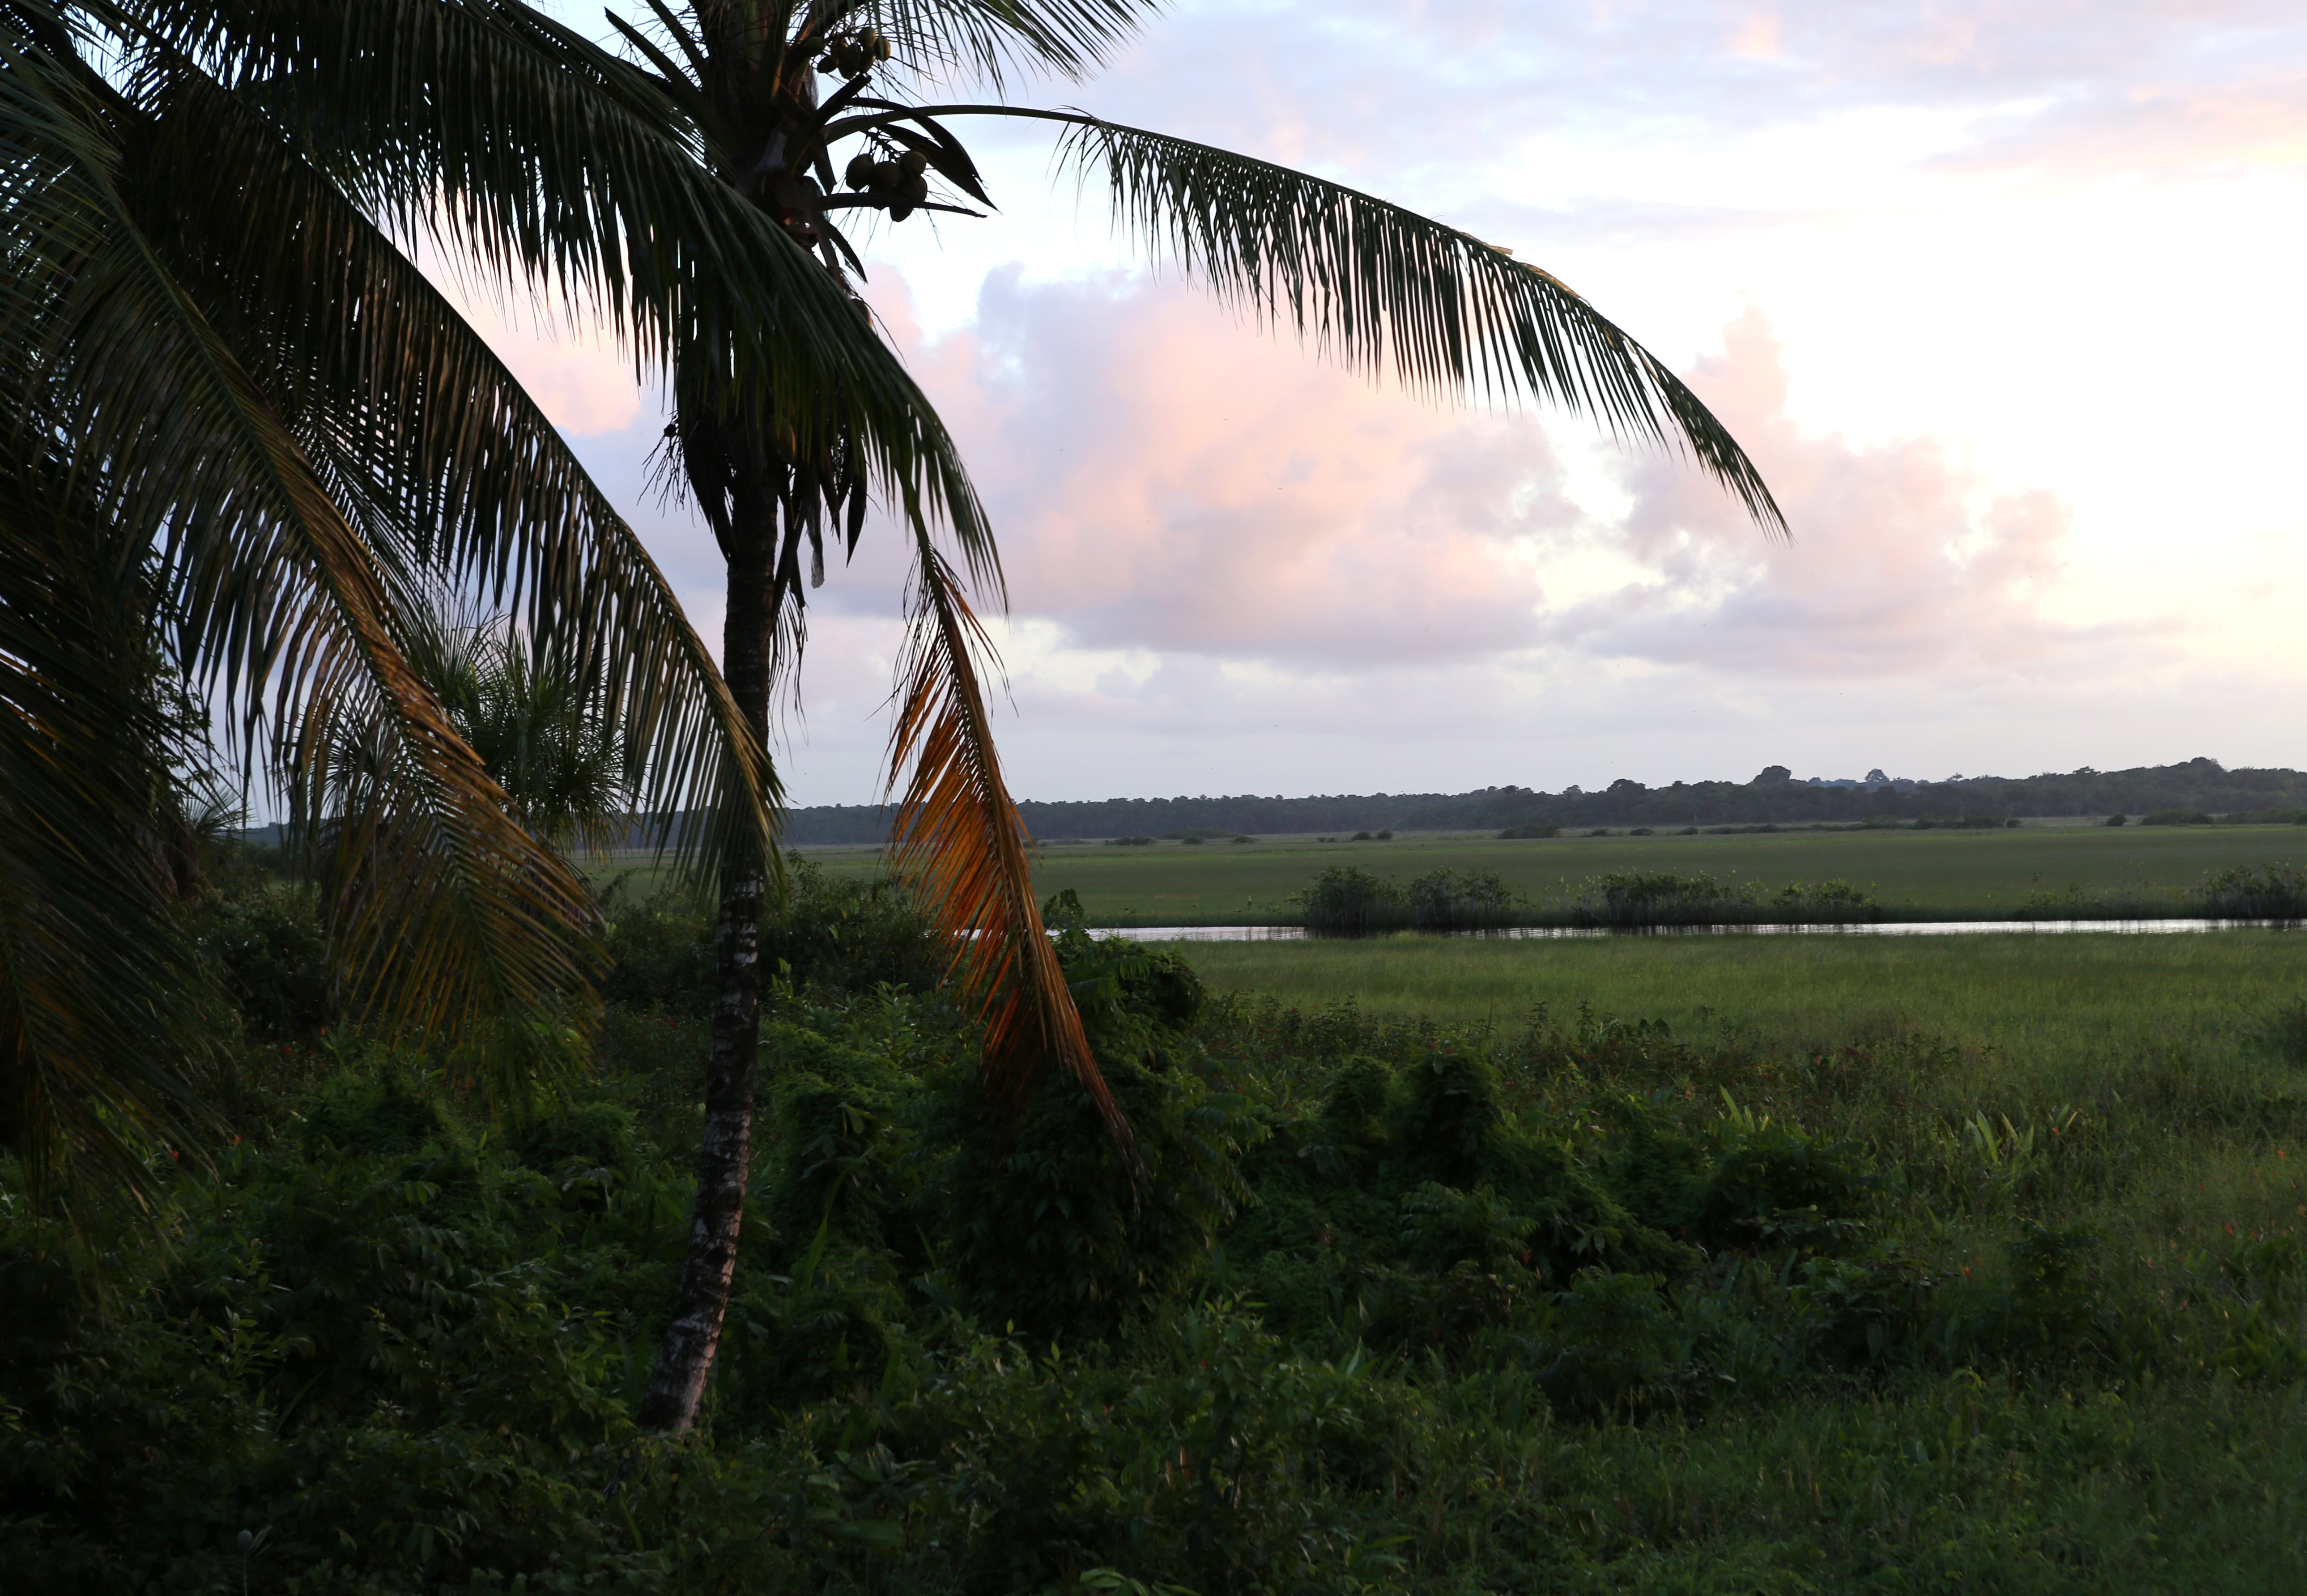 The sun rises over palm trees in mid-March along Pomeroon River in the interior of Guyana. Photo: CNS/Bob Roller